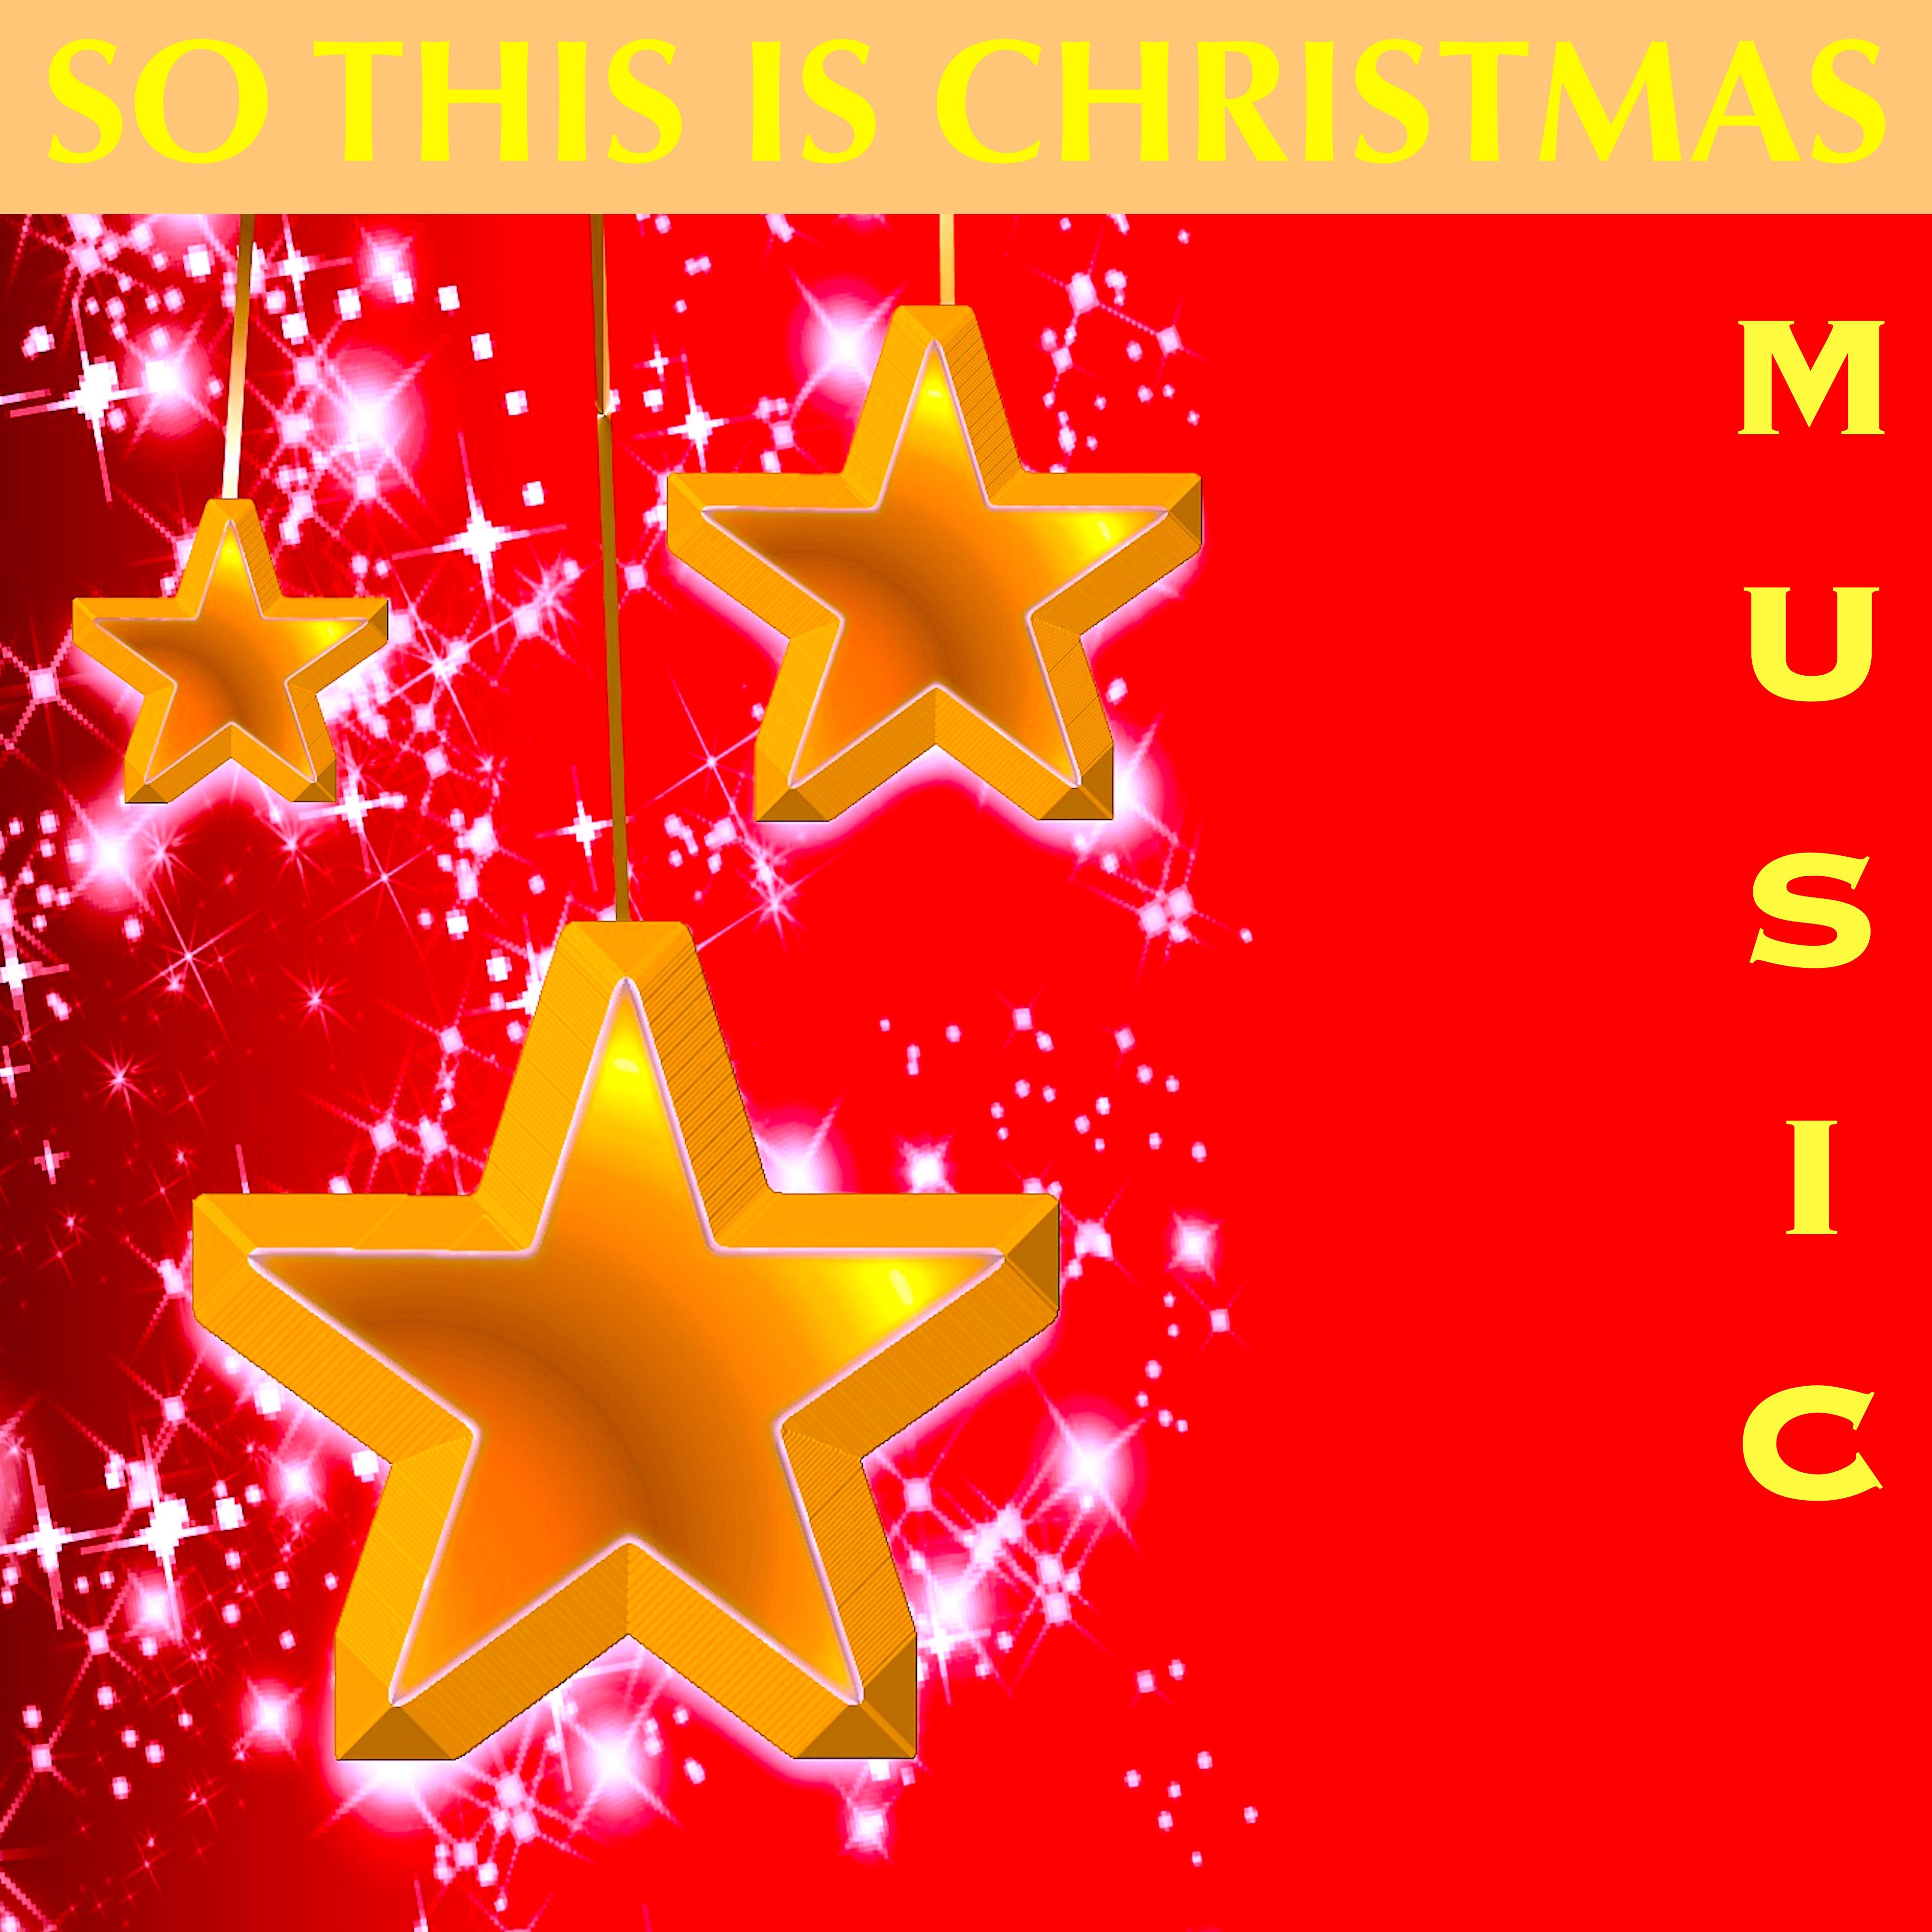 So This Is Christmas – Songs and Background for Christmas Dinner and New Year's Eve Dinner